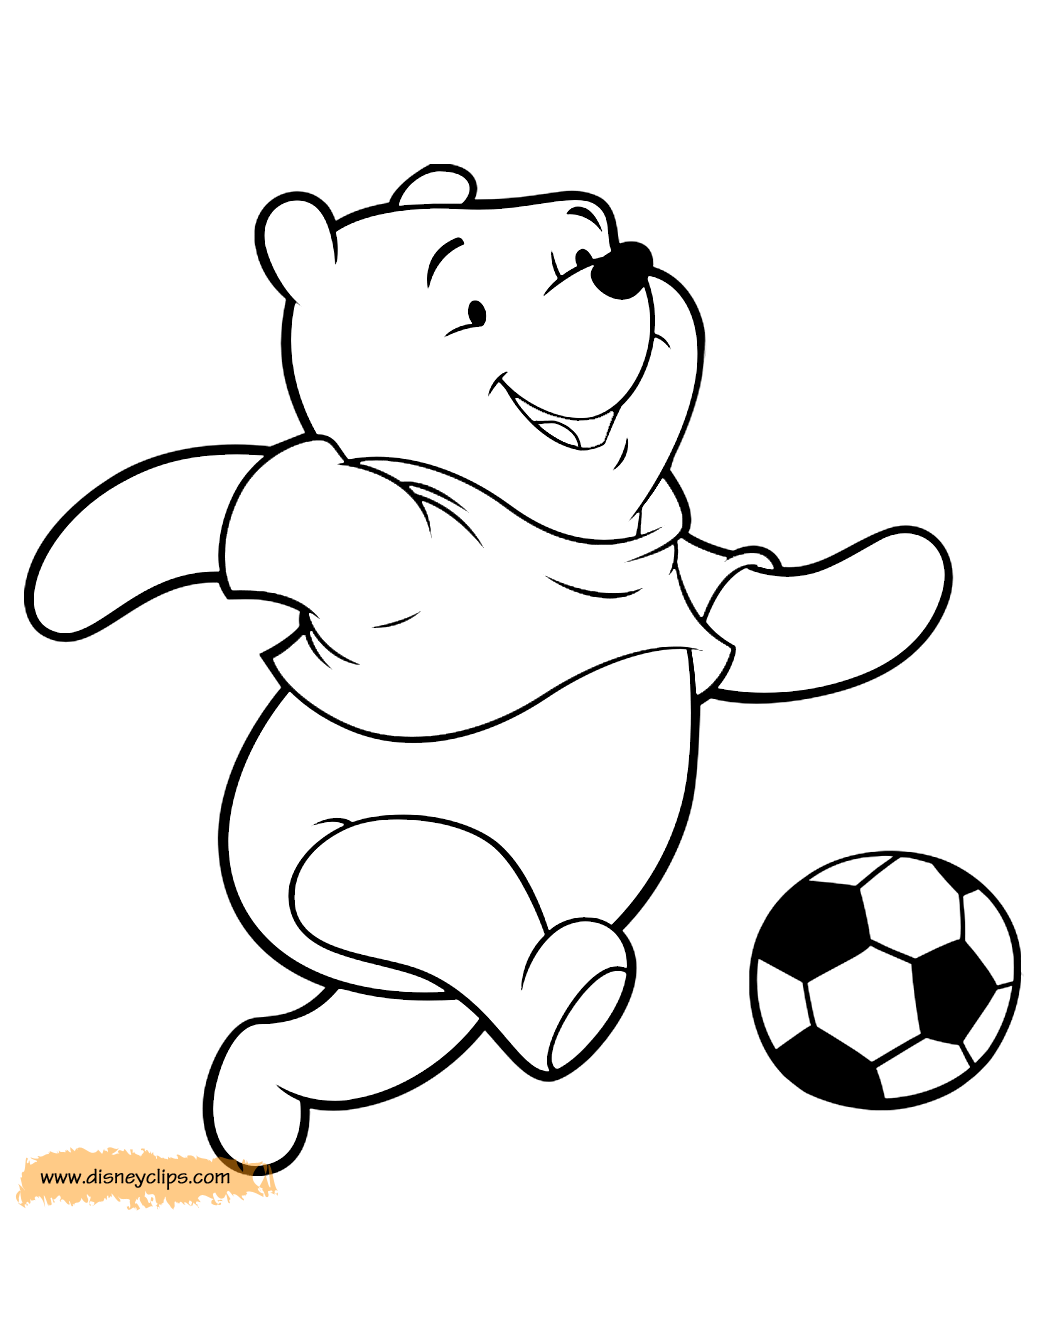 Download Winnie the Pooh Coloring Pages | Disney's World of Wonders